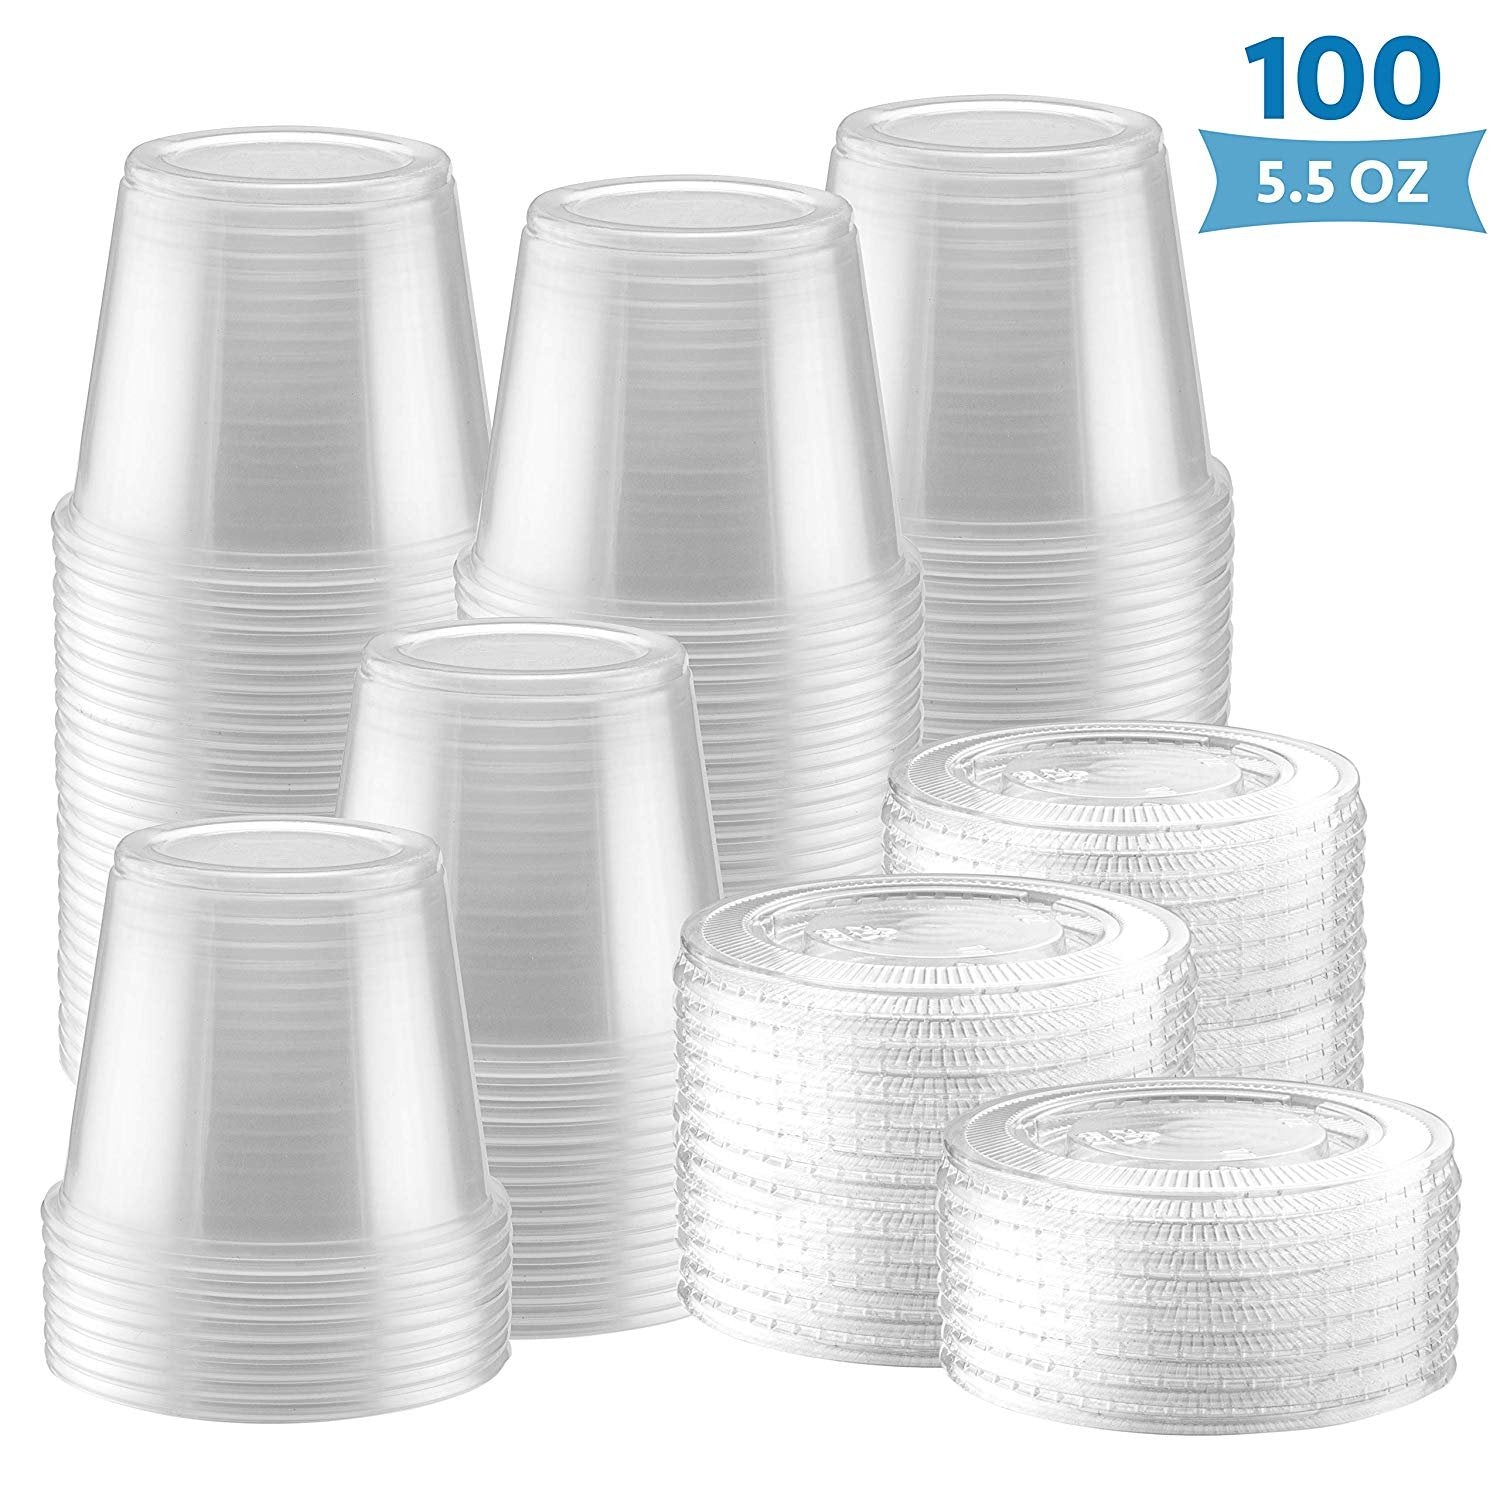 Deli Cup and Lid Medium Clear 4 Ounces 100 Count Box